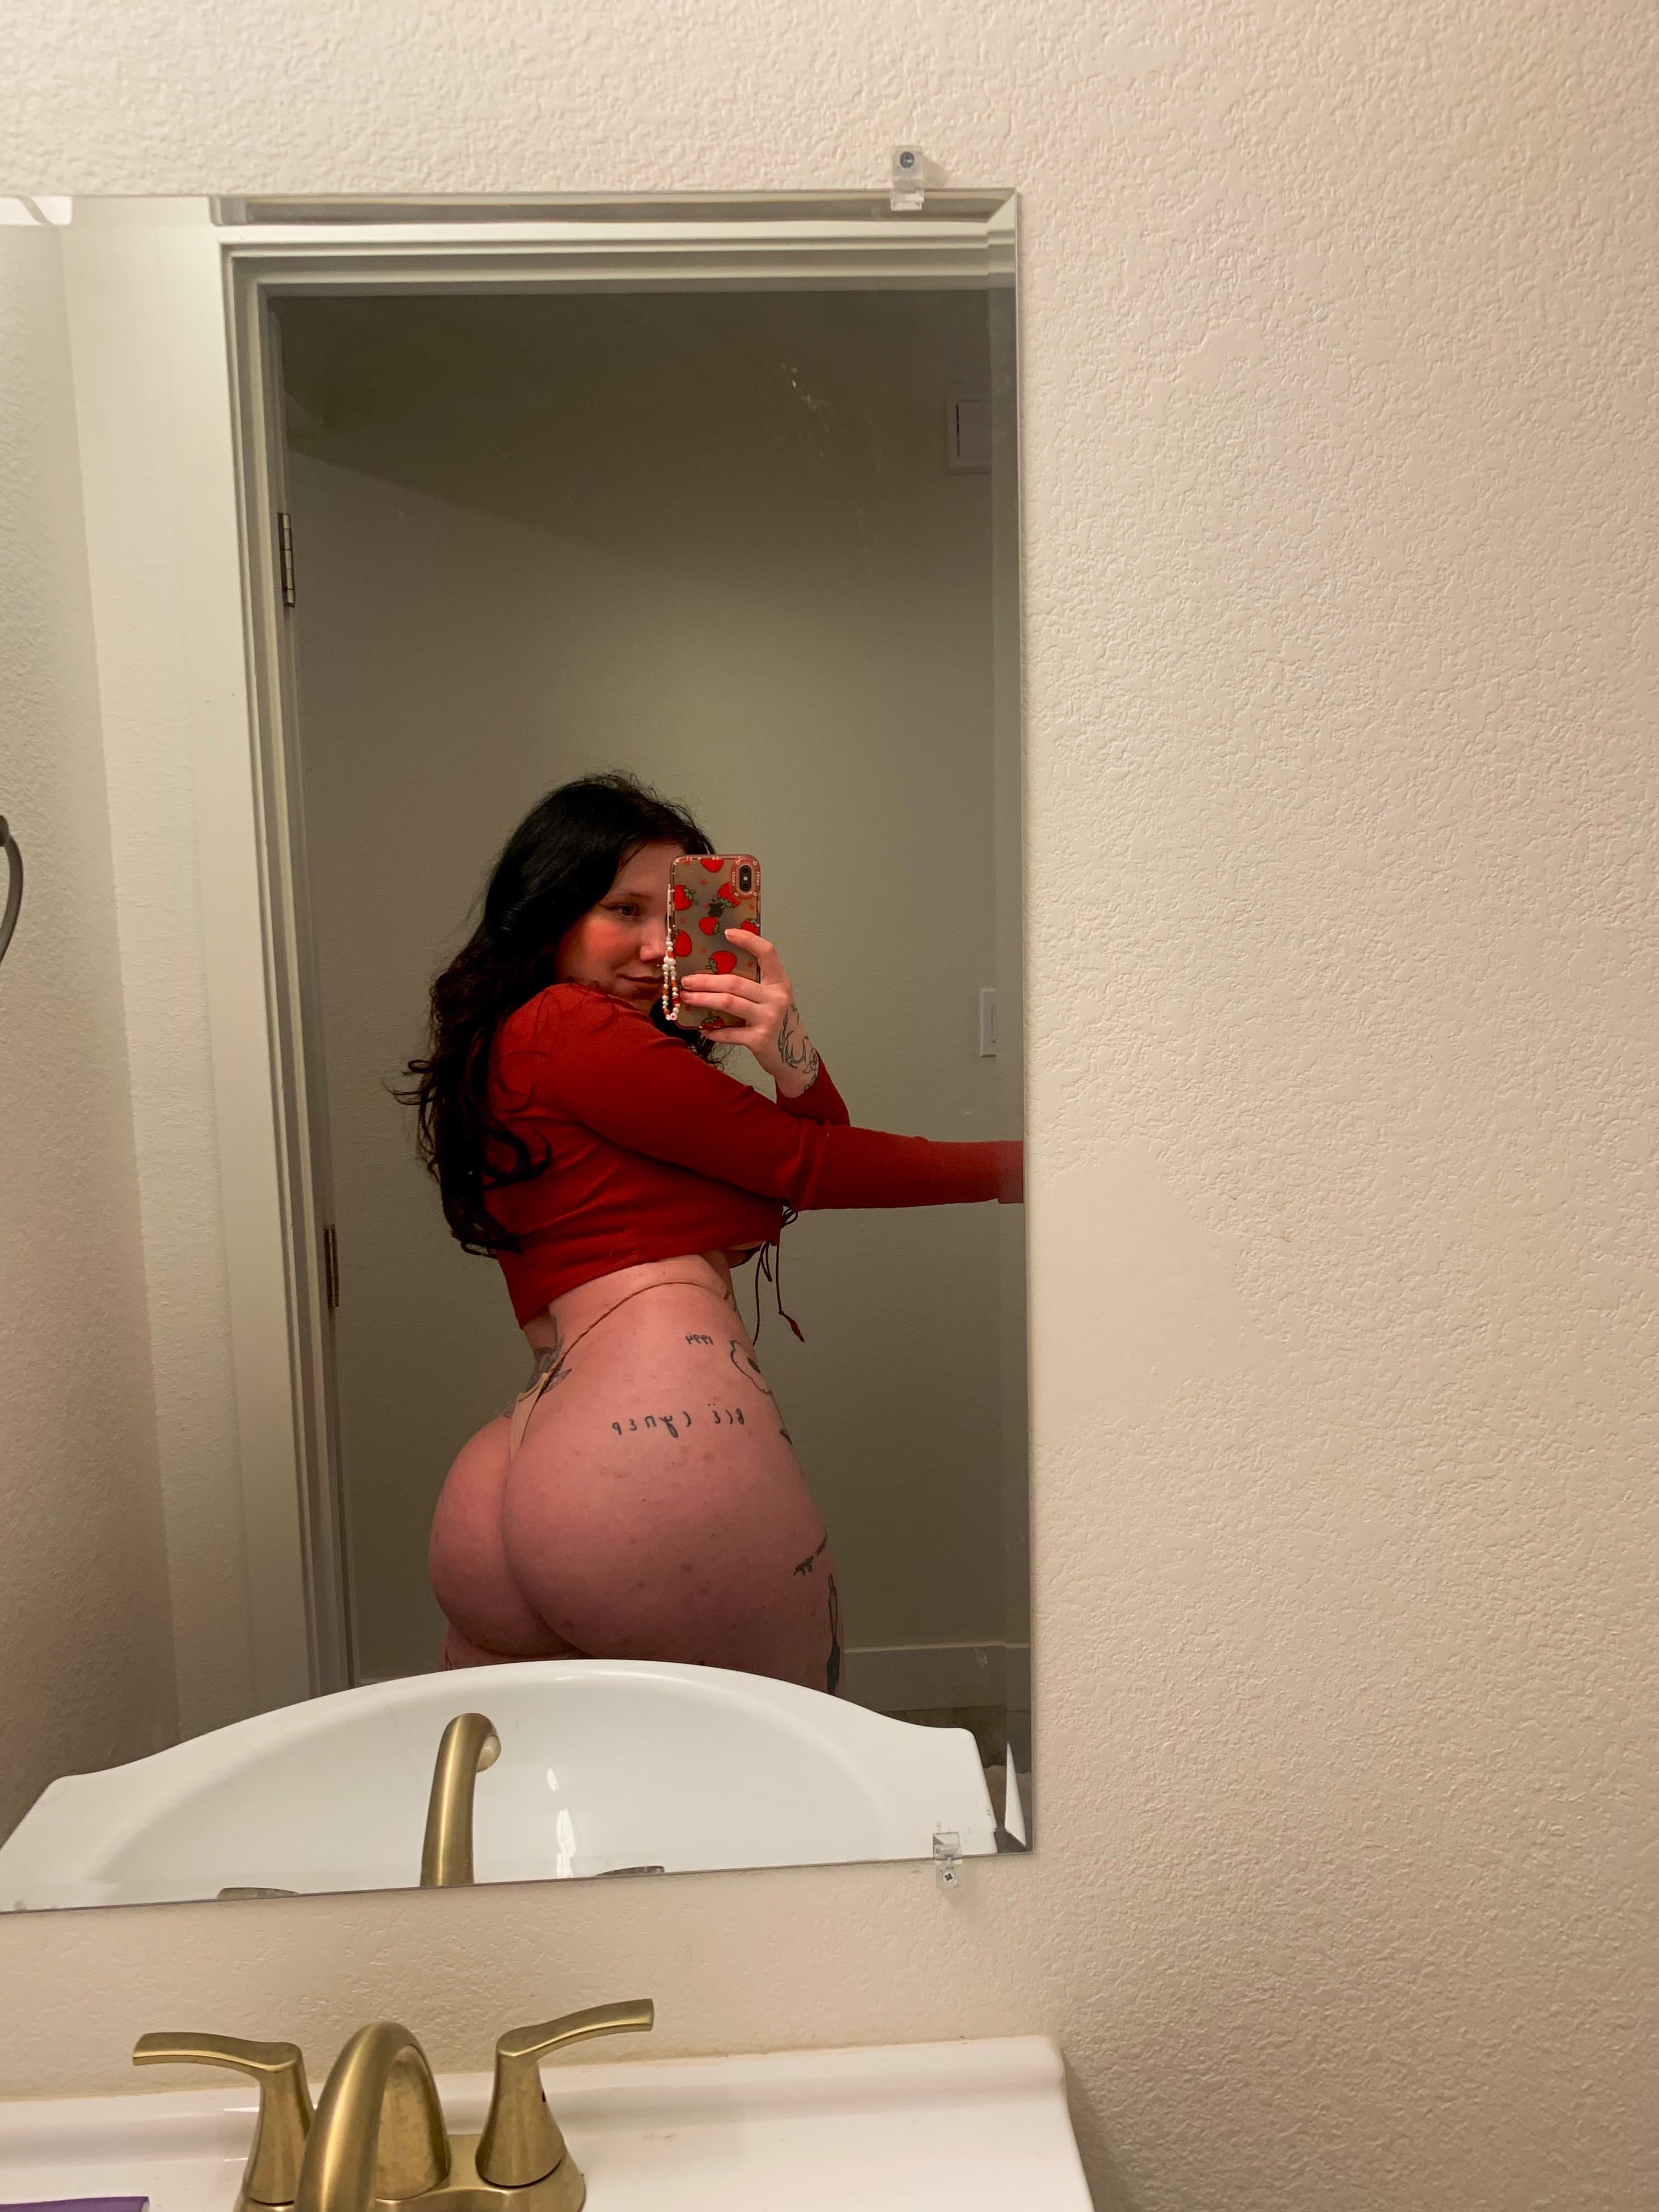 PAWG is it spanking material